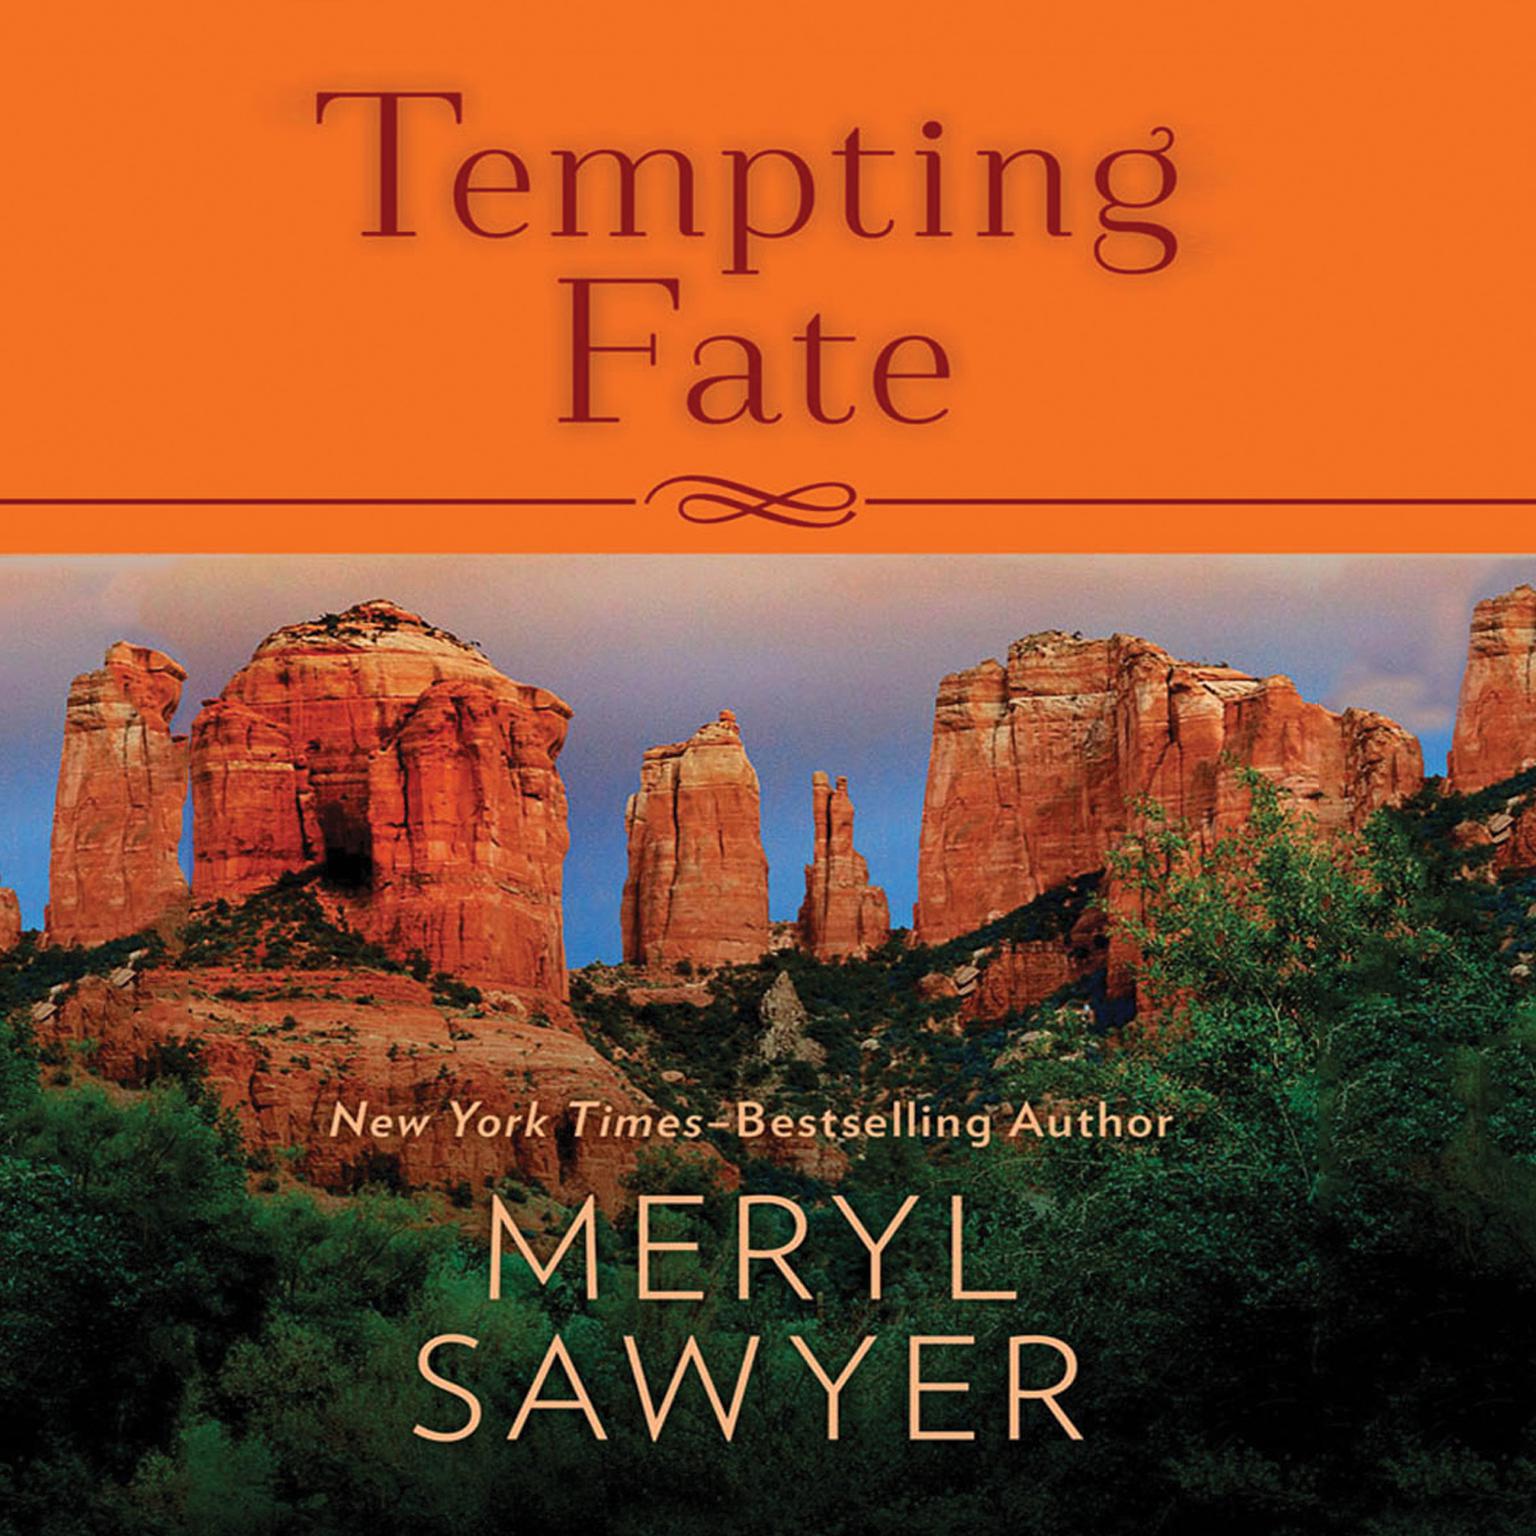 Tempting Fate Audiobook, by Meryl Sawyer